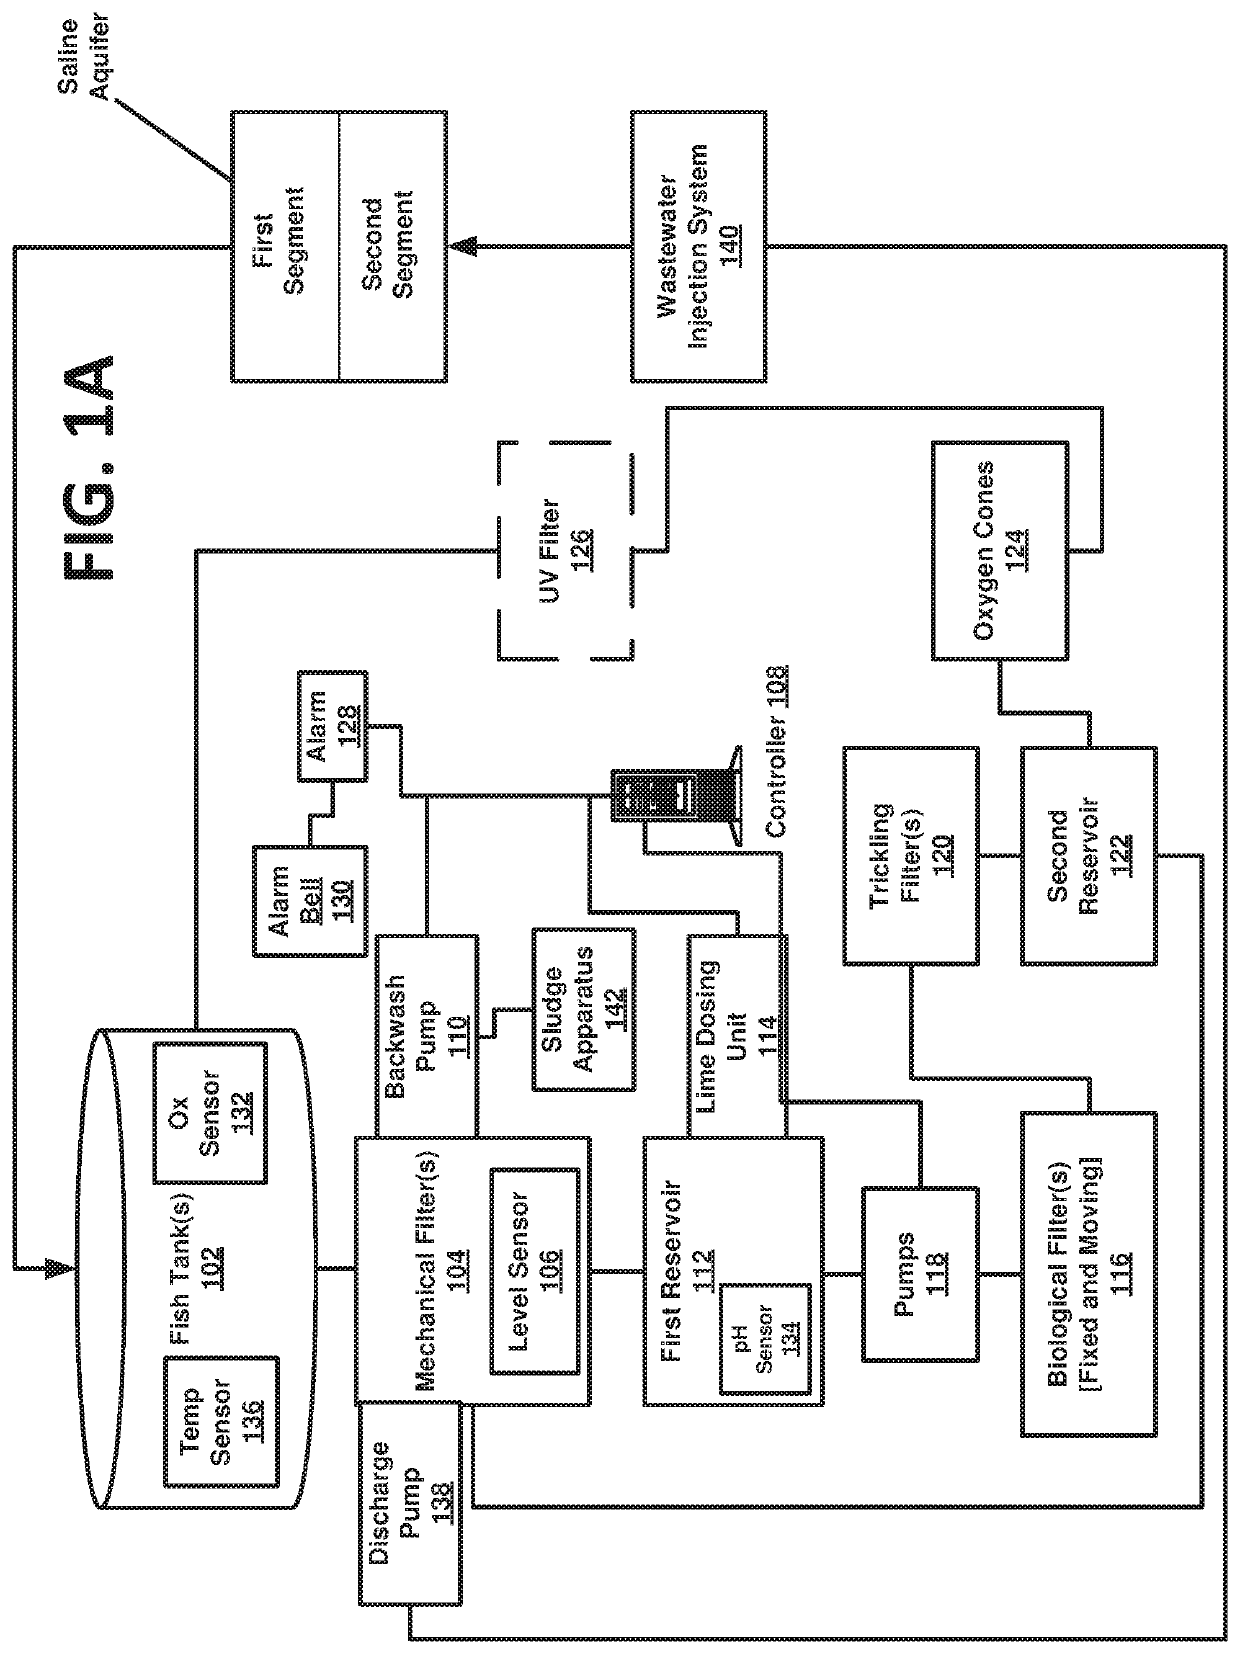 Systems and methods of intensive recirculating aquaculture